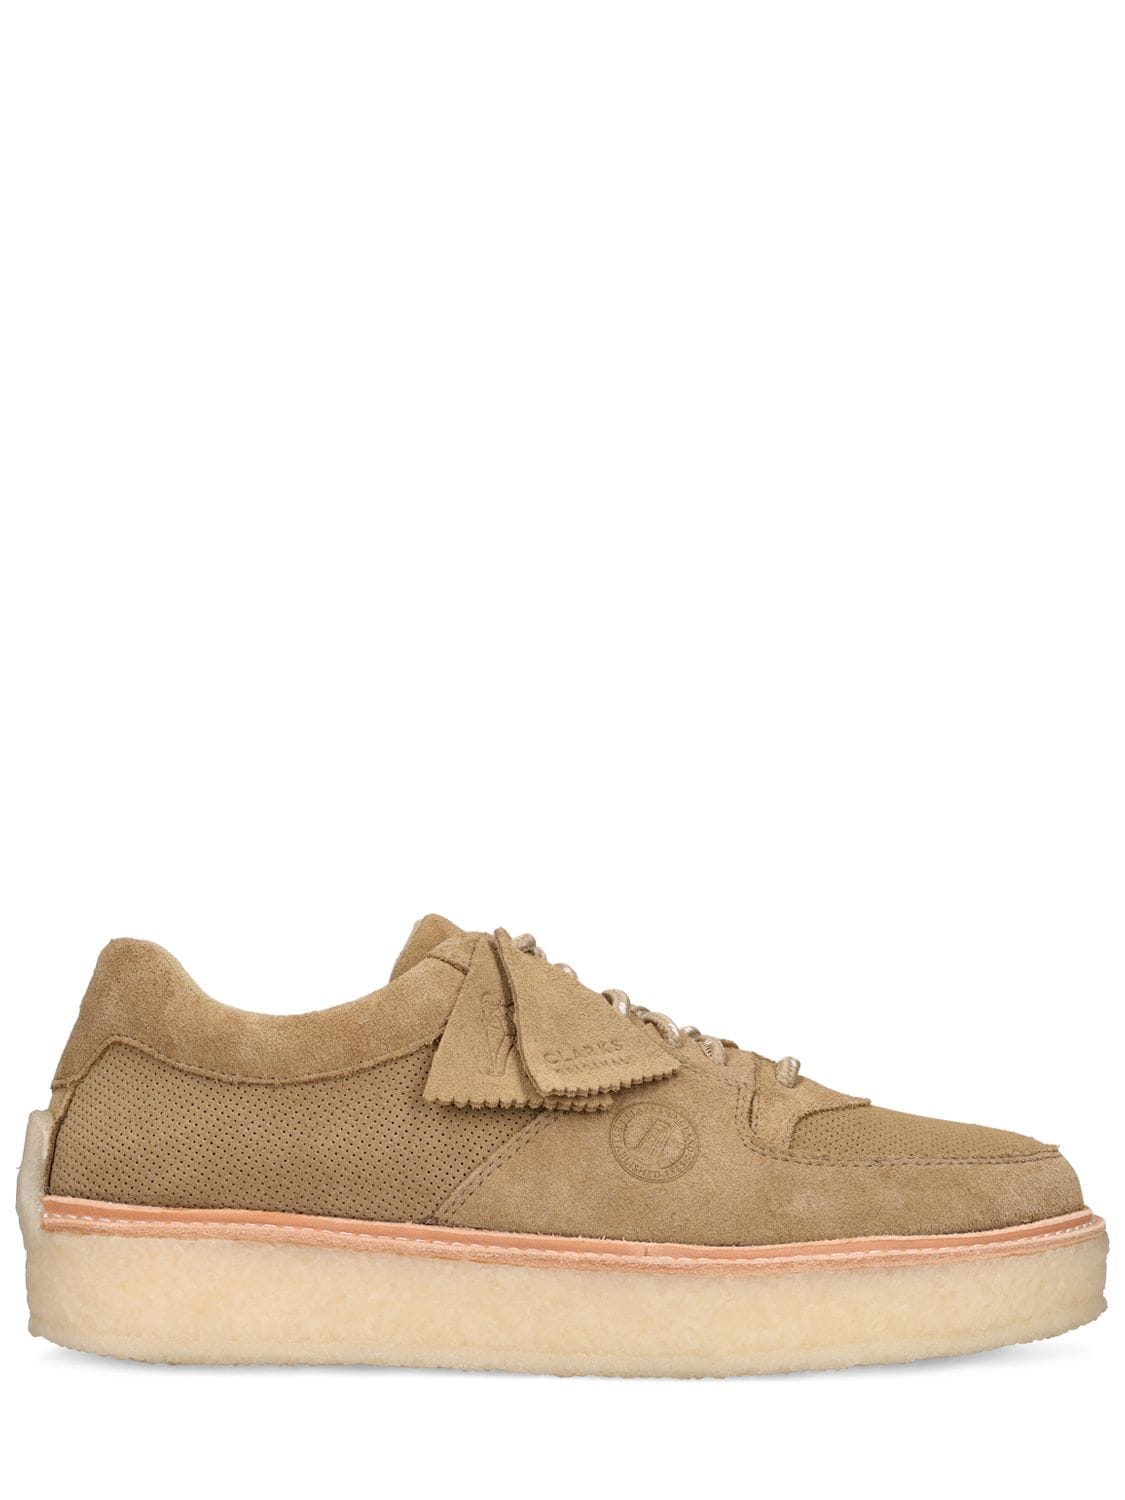 Clarks Originals Sandford Suede Lace-up Shoes In Light Sand | ModeSens